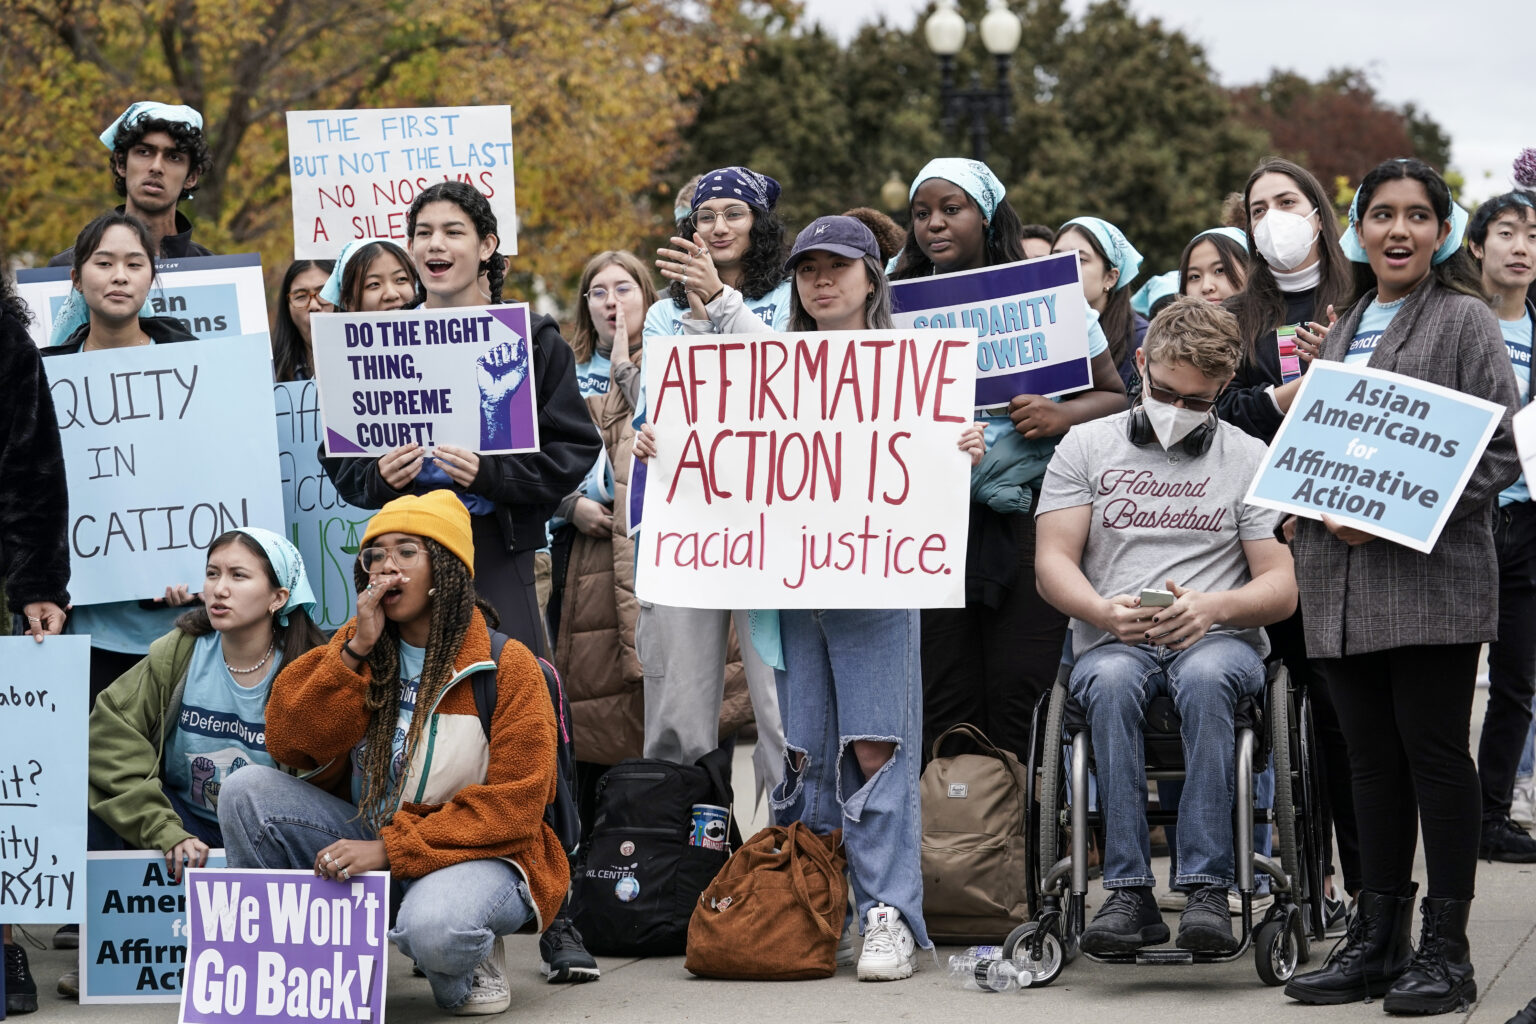 Affirmative Action outlawed by Supreme Court #39 s ruling 6 3